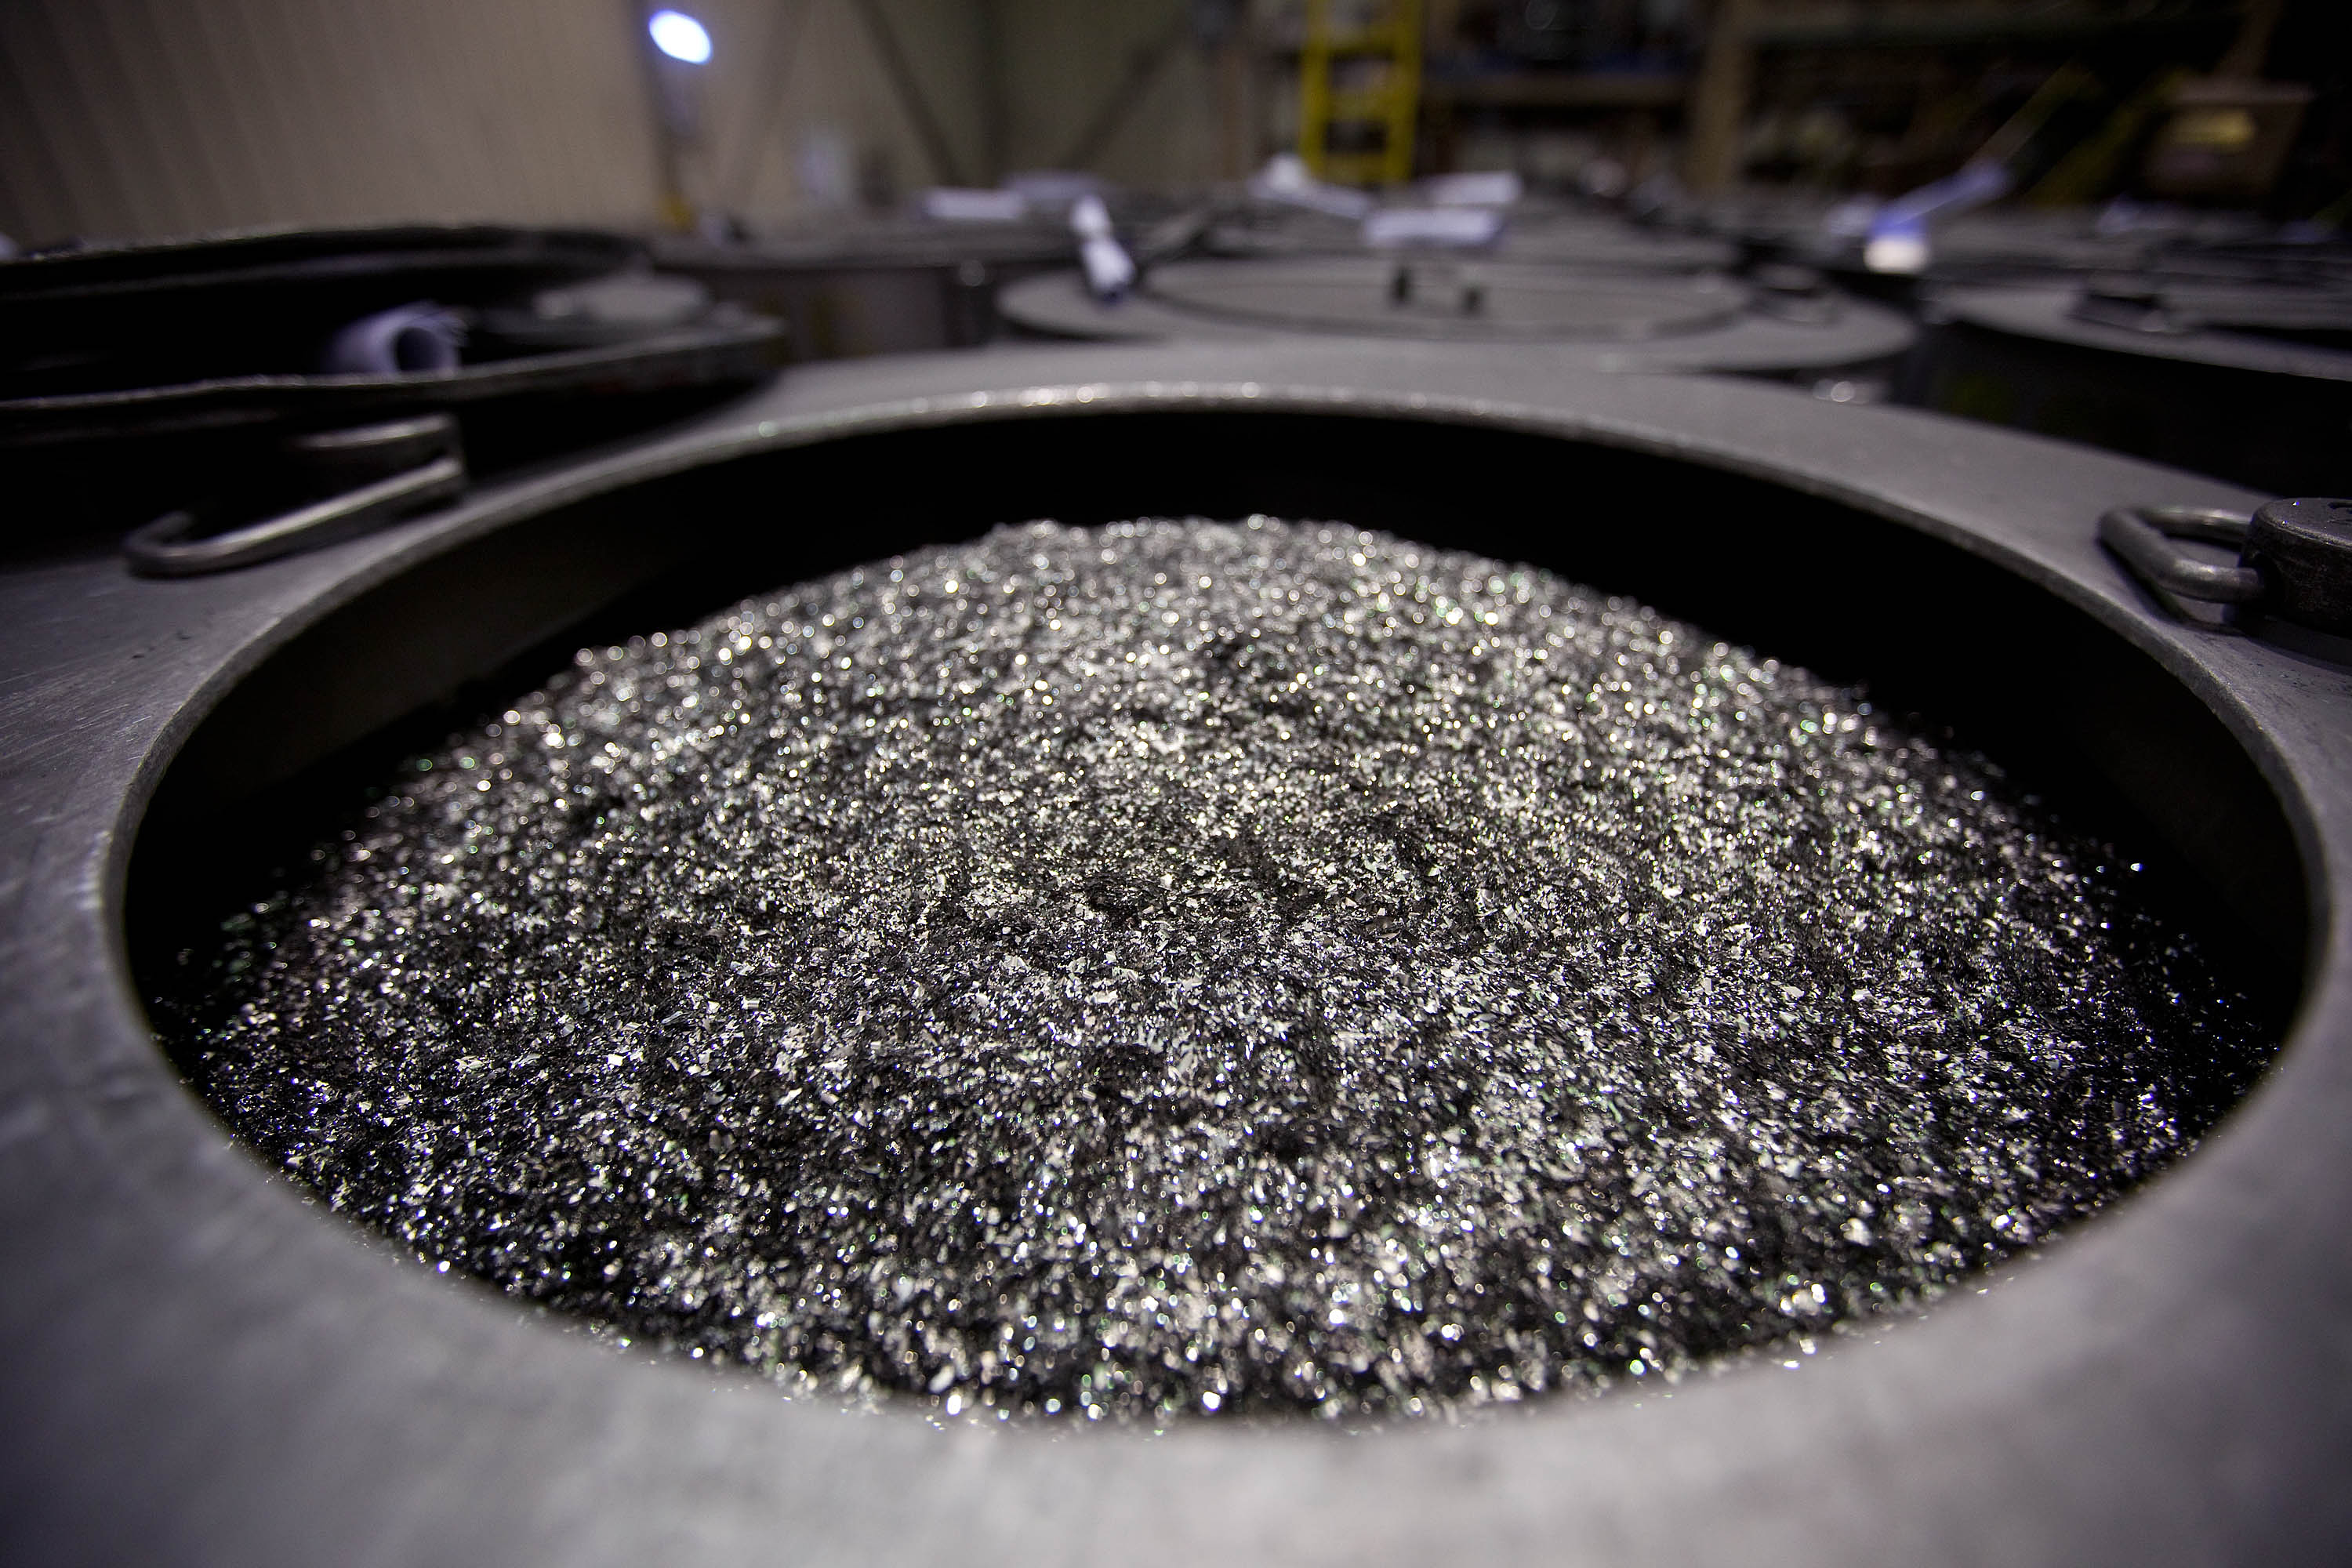 Toyota's new magnet won't depend on some key rare-earth | Ars Technica